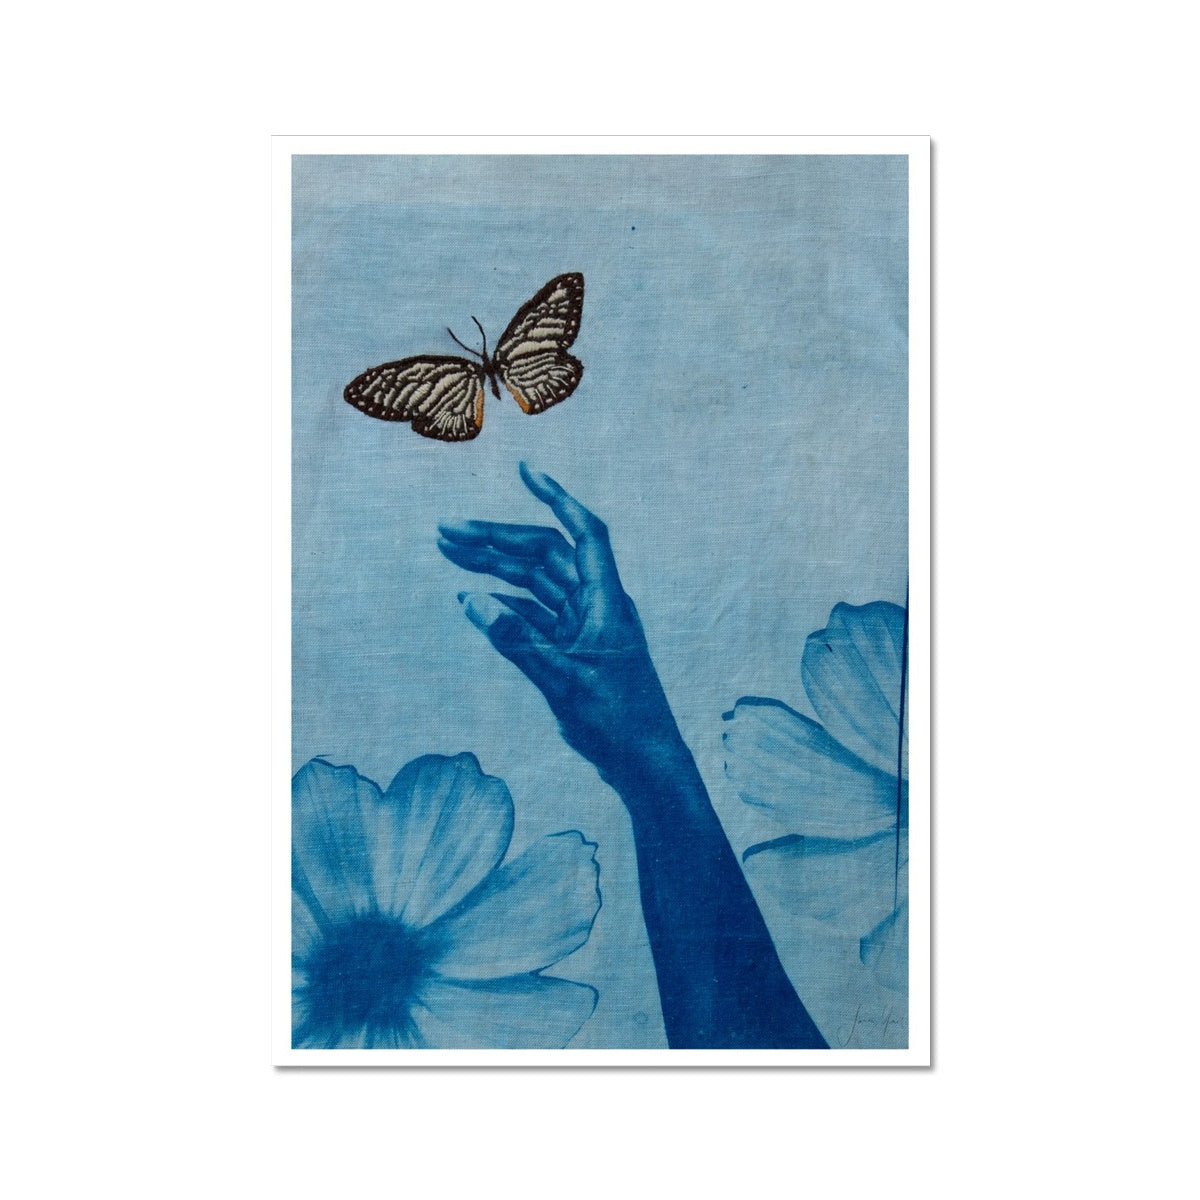 The Butterfly and Hand - Fine Art Print